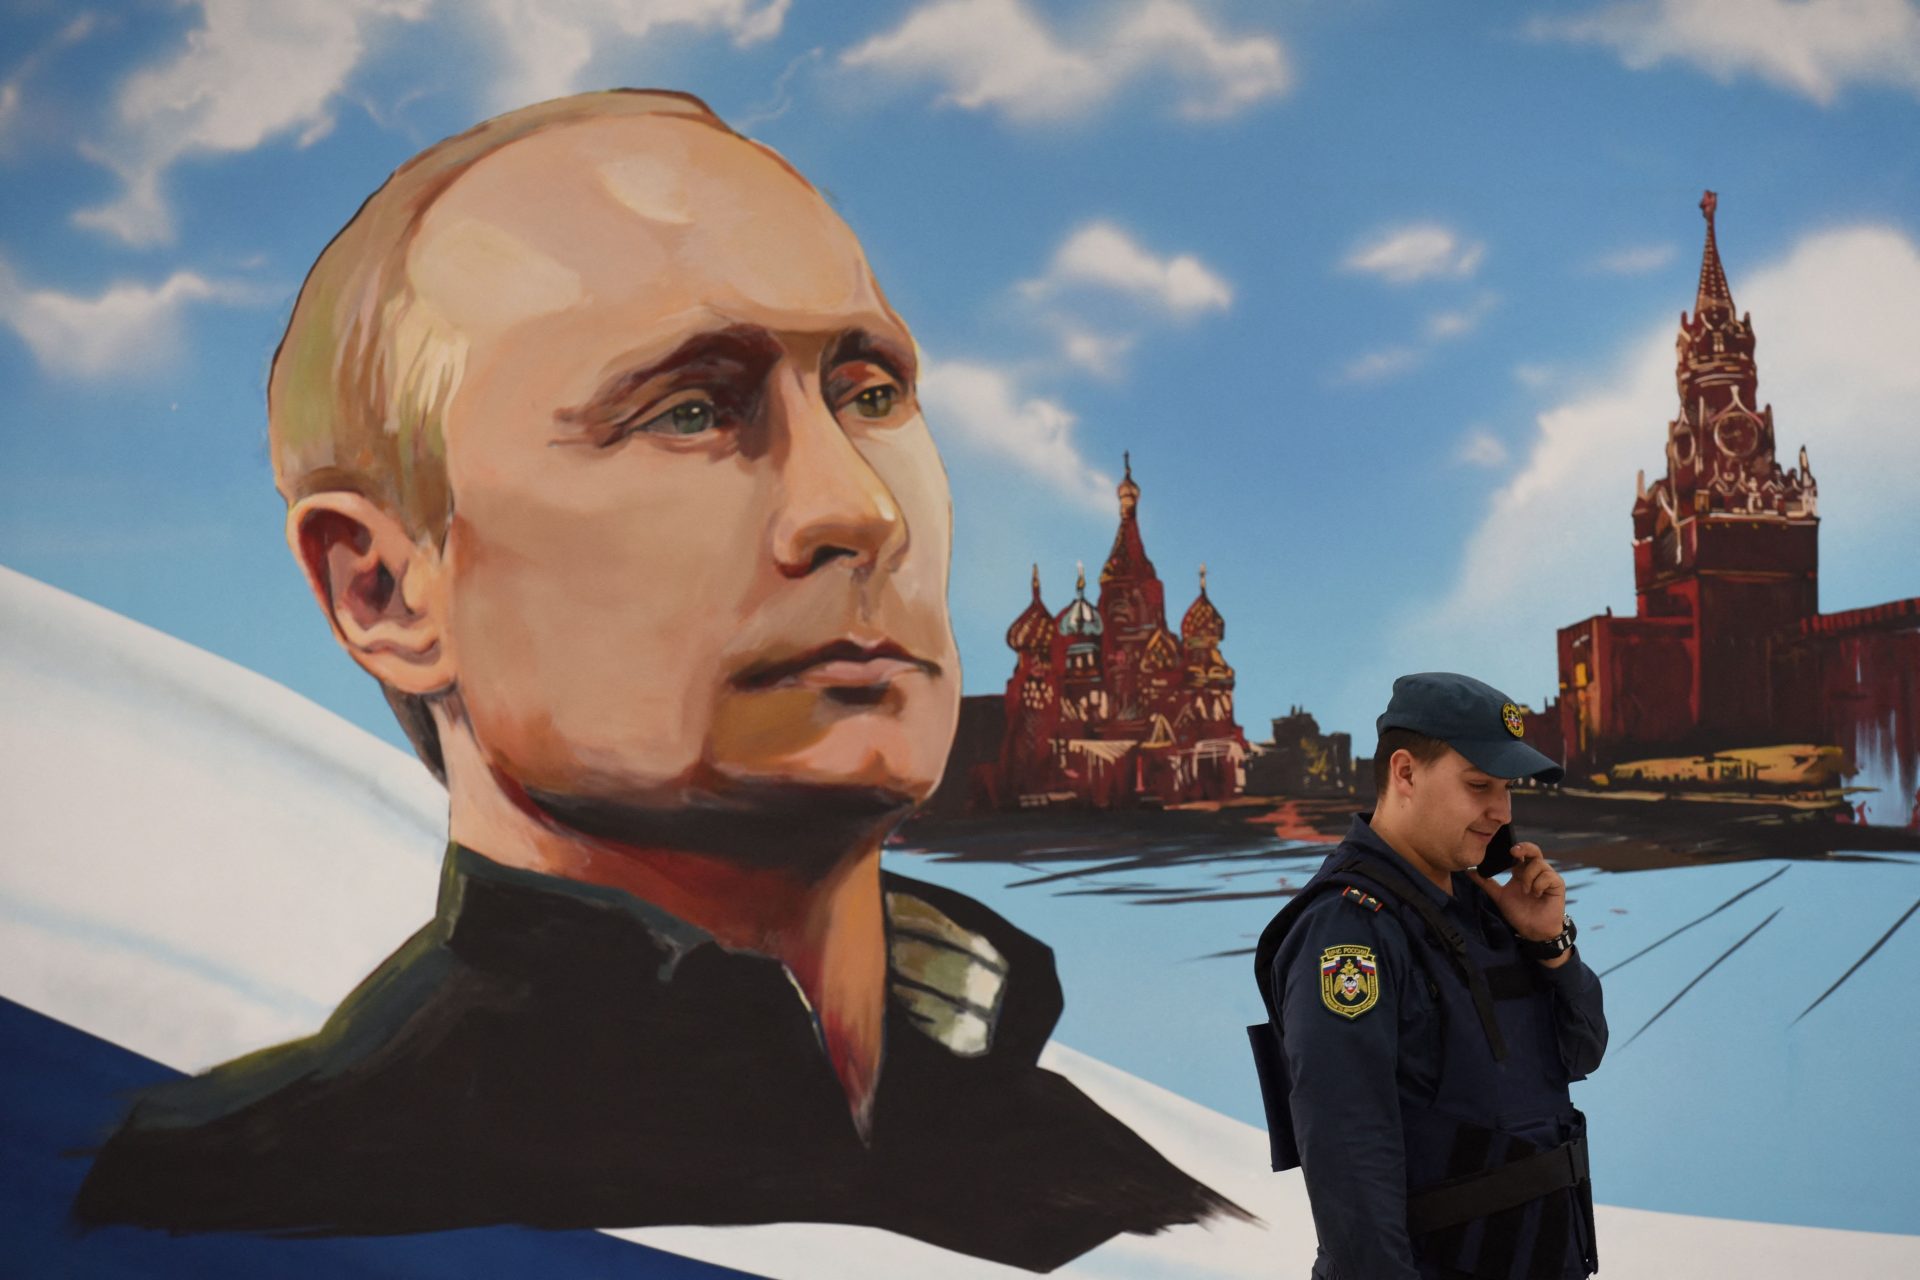 Will Putin’s latest political gamble come back to hurt him?